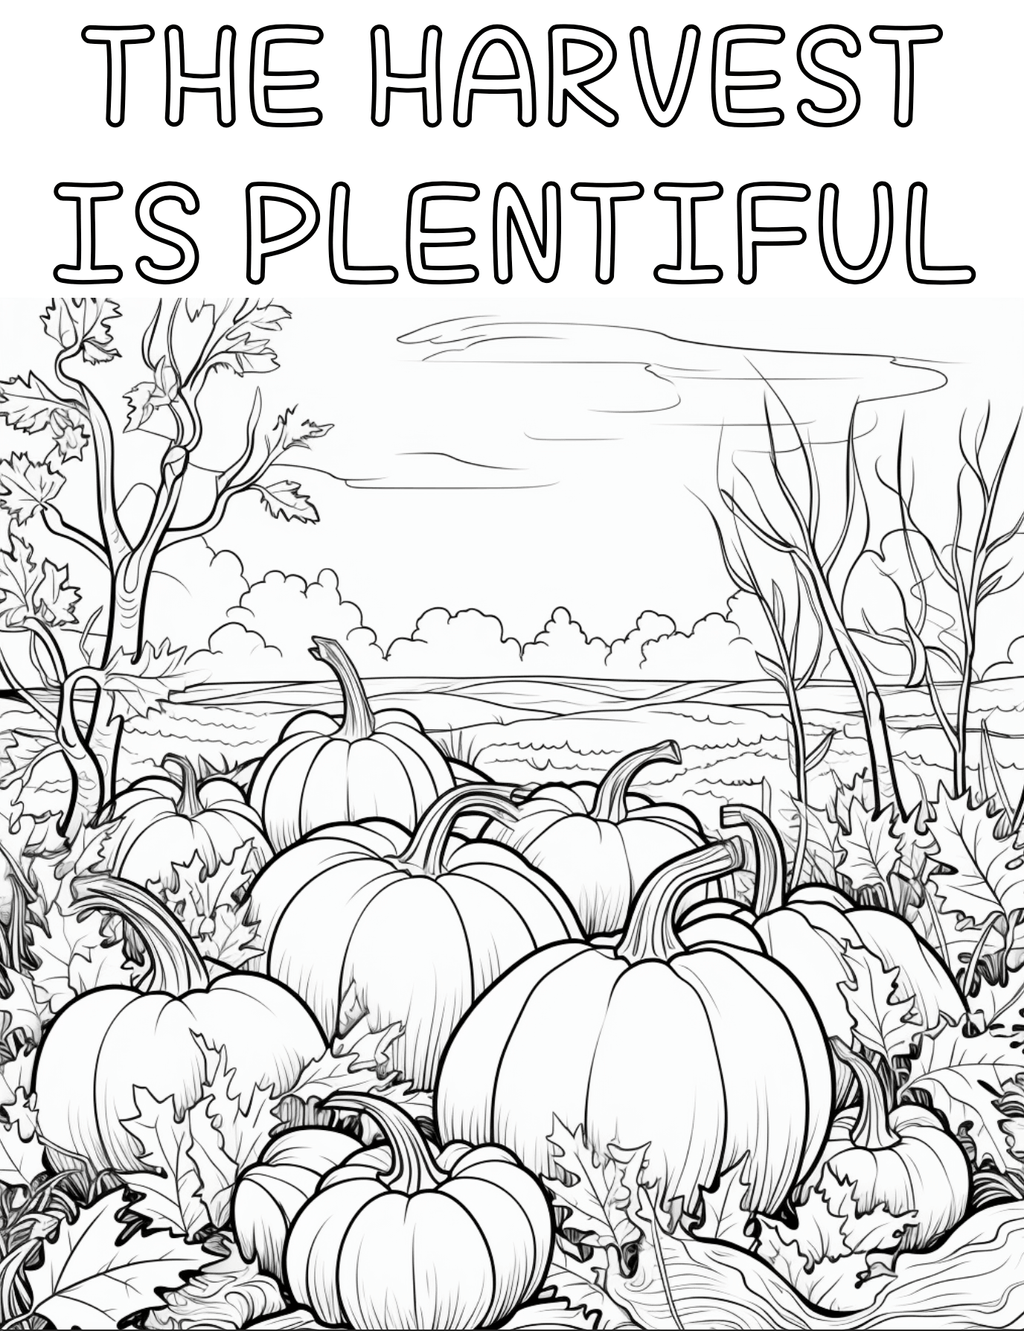 The harvest is plentiful coloring page